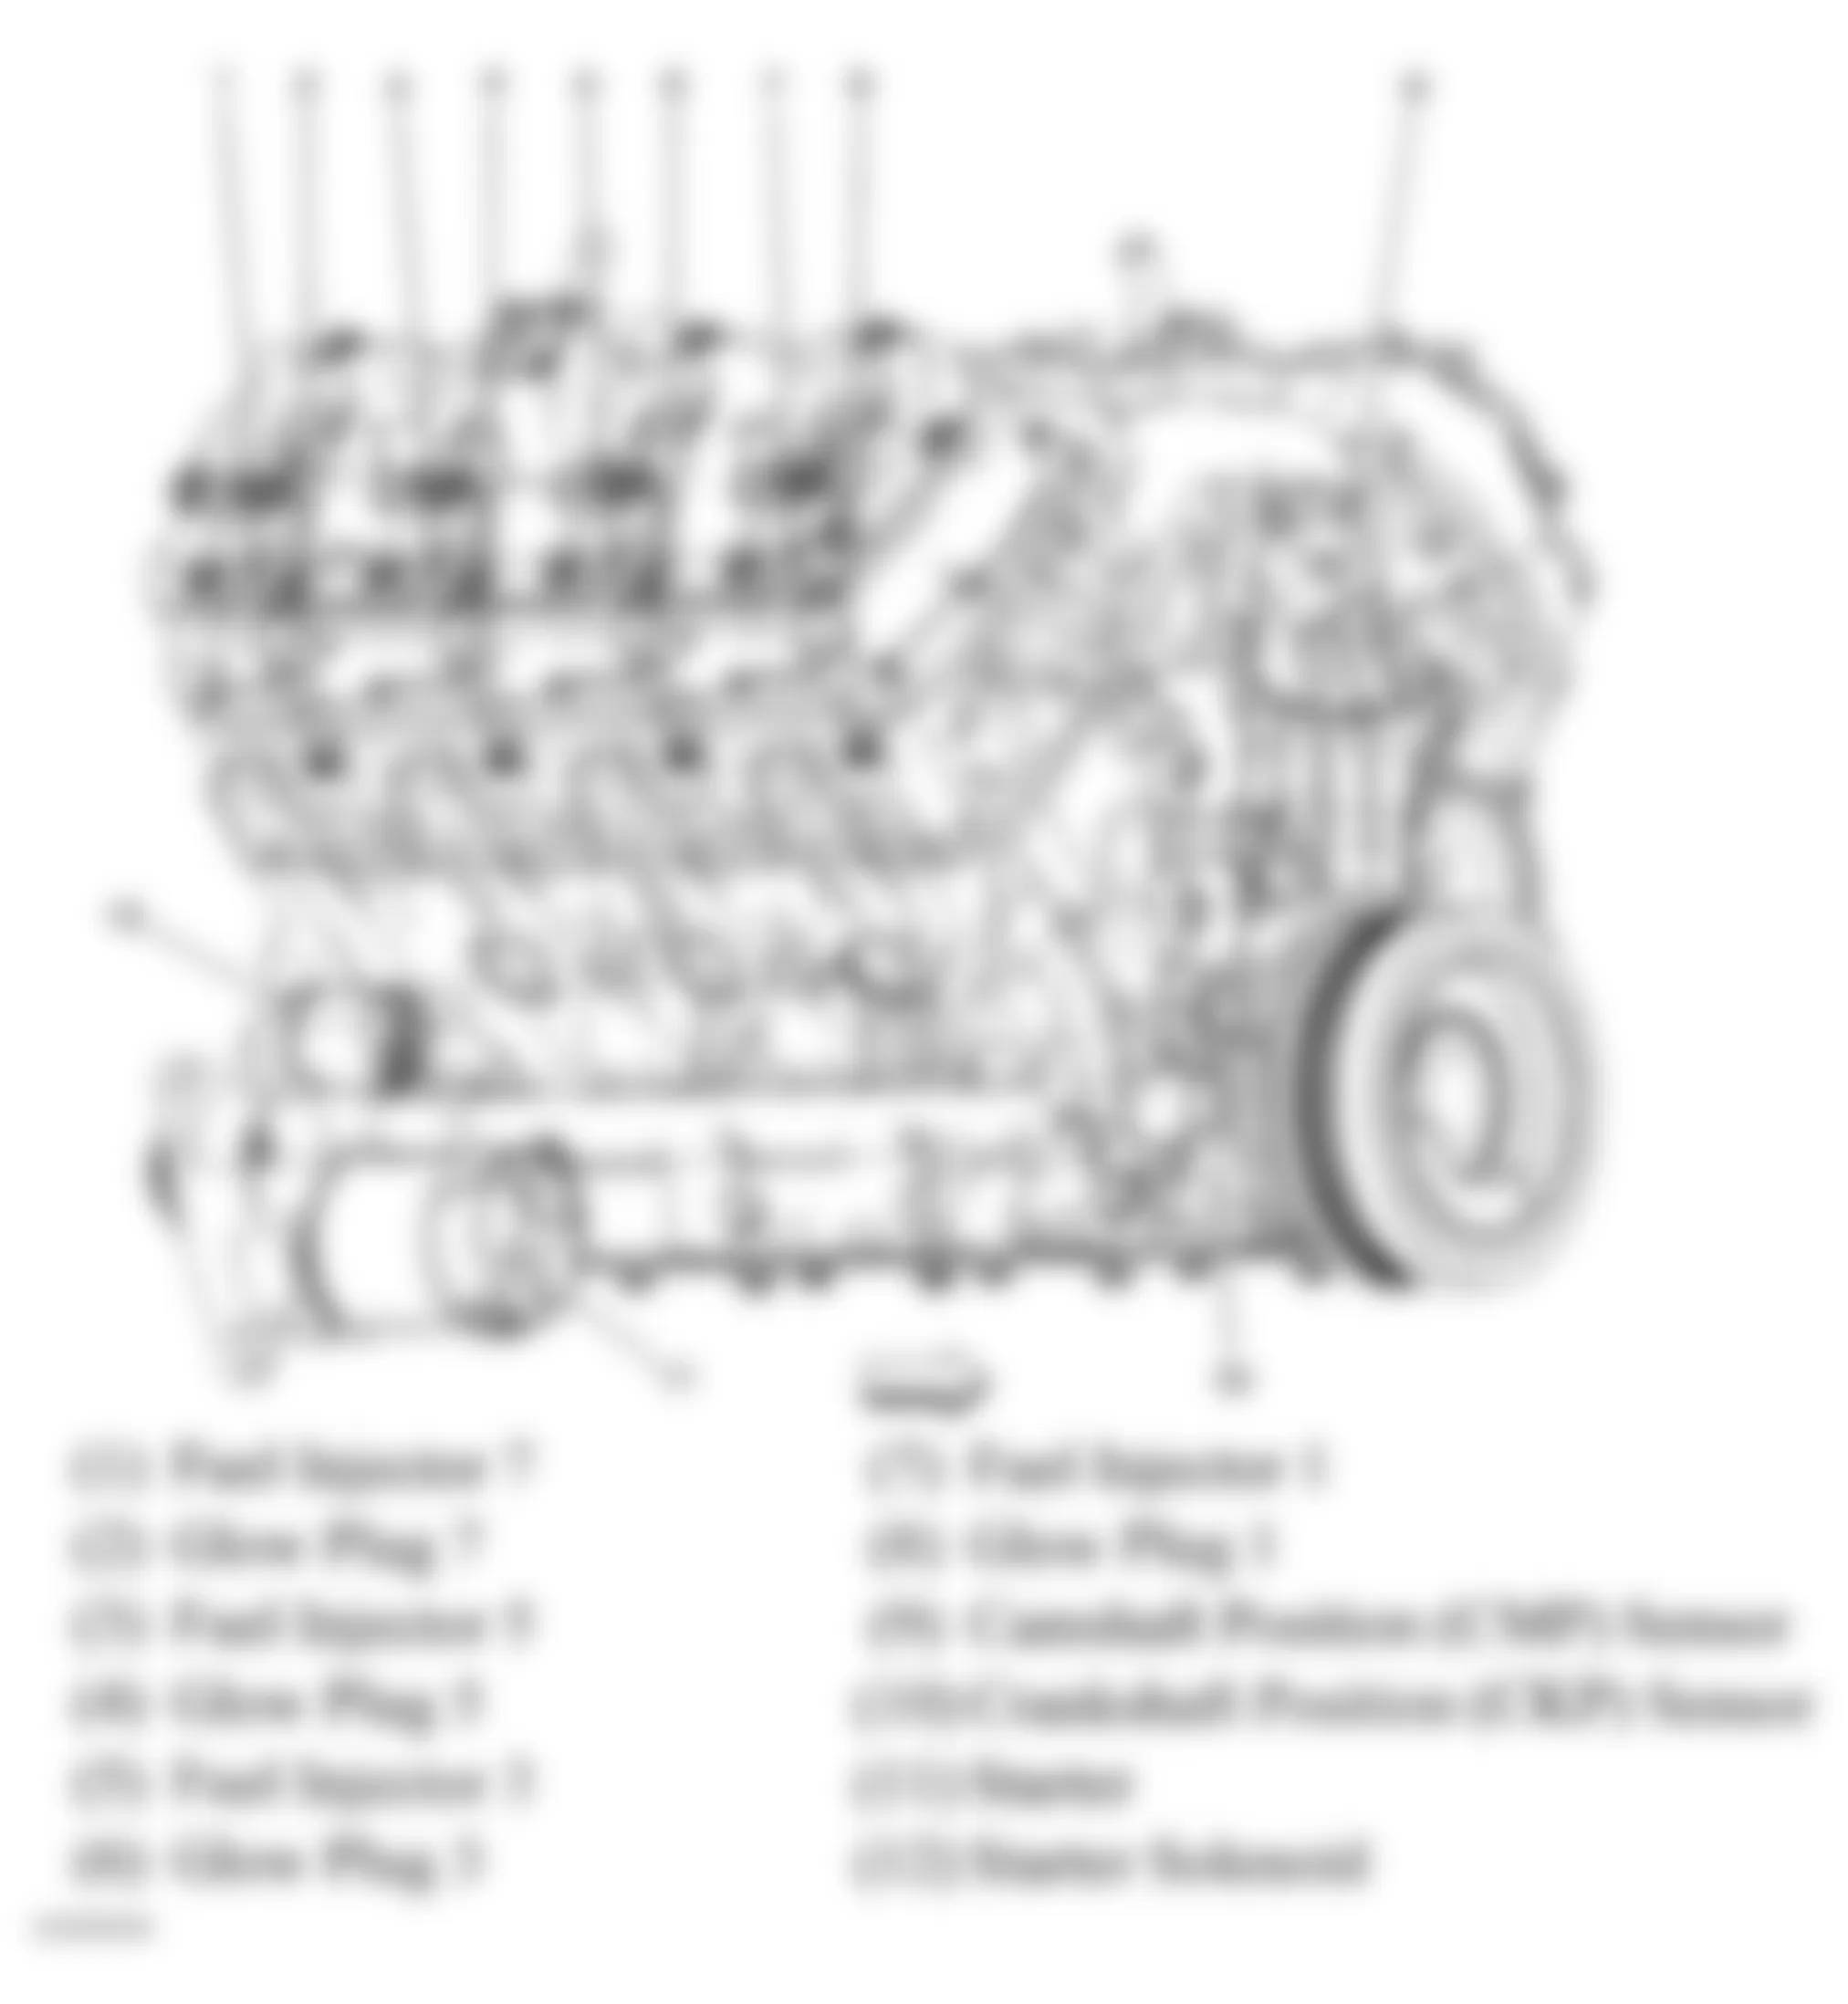 GMC Savana G1500 2010 - Component Locations -  Right Side Of Engine (6.6L)